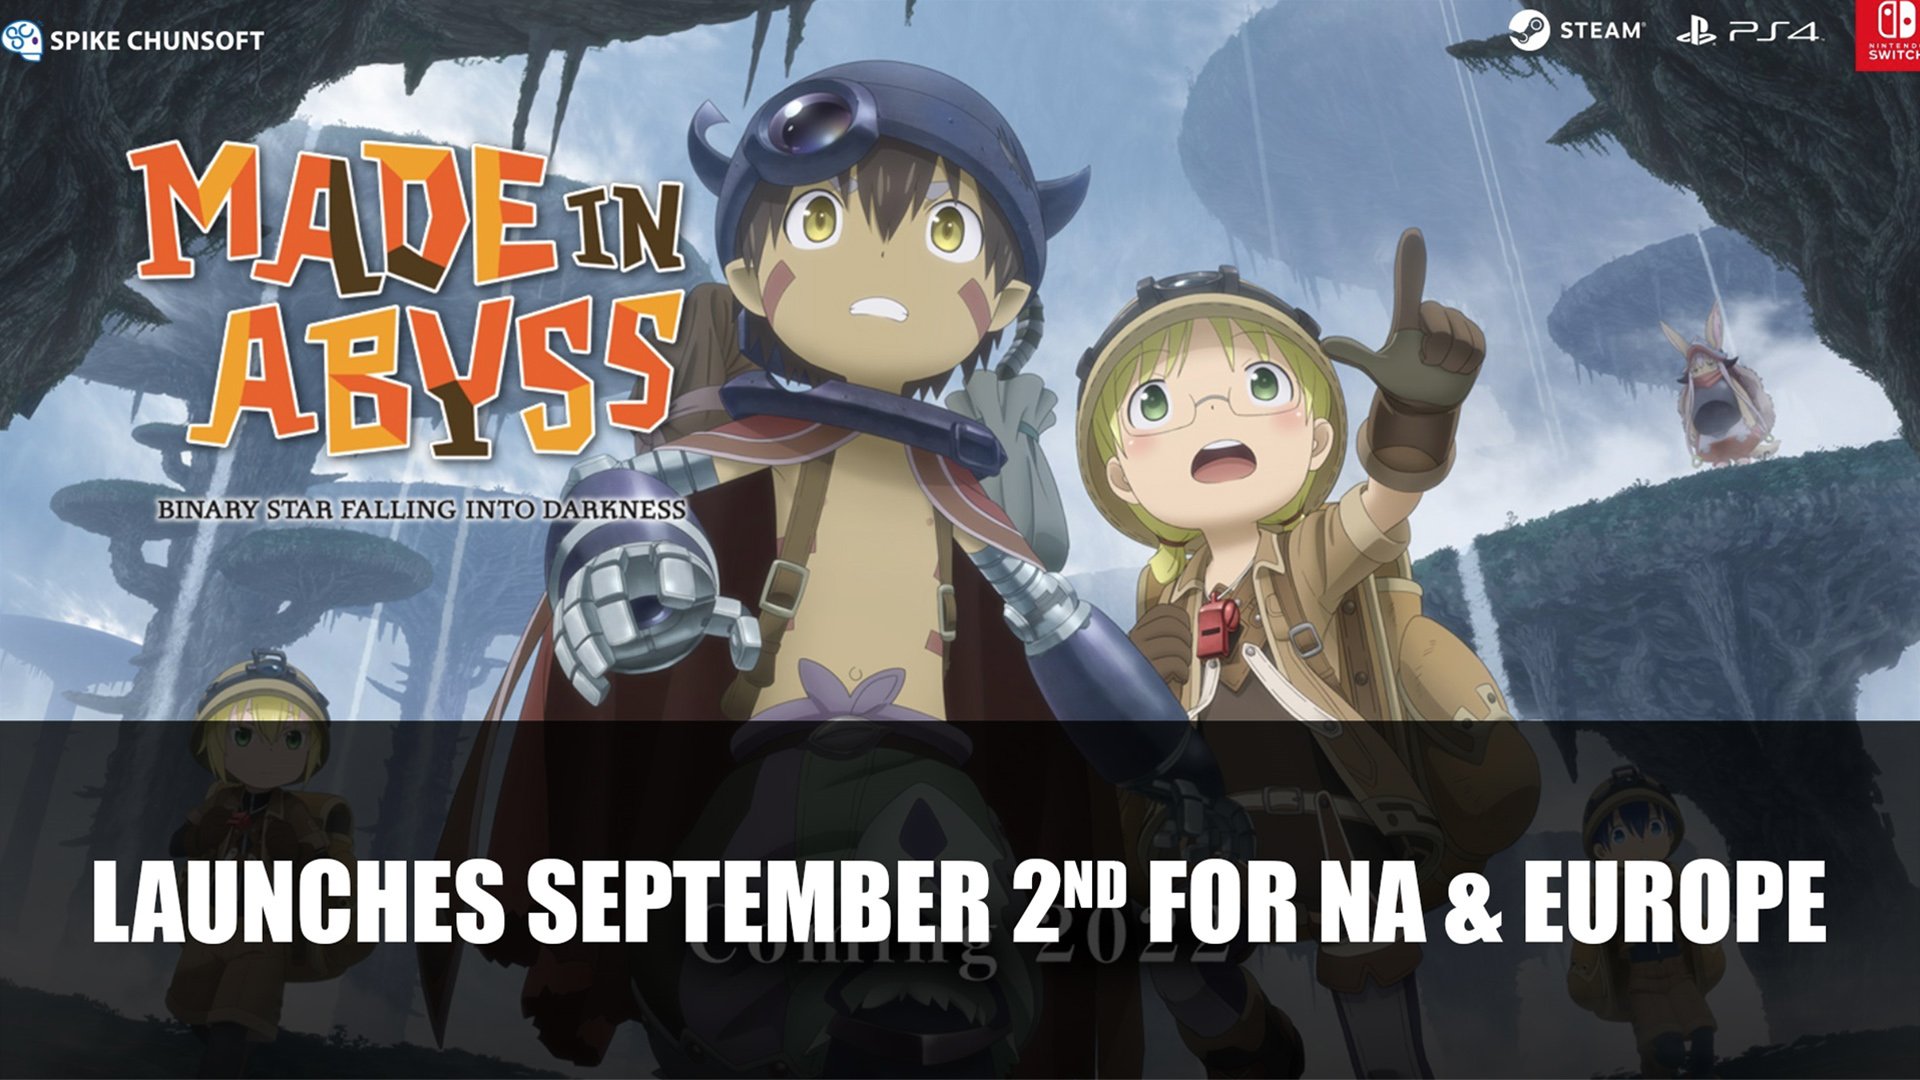 Made in Abyss: Binary Star Falling into Darkness - Announcement